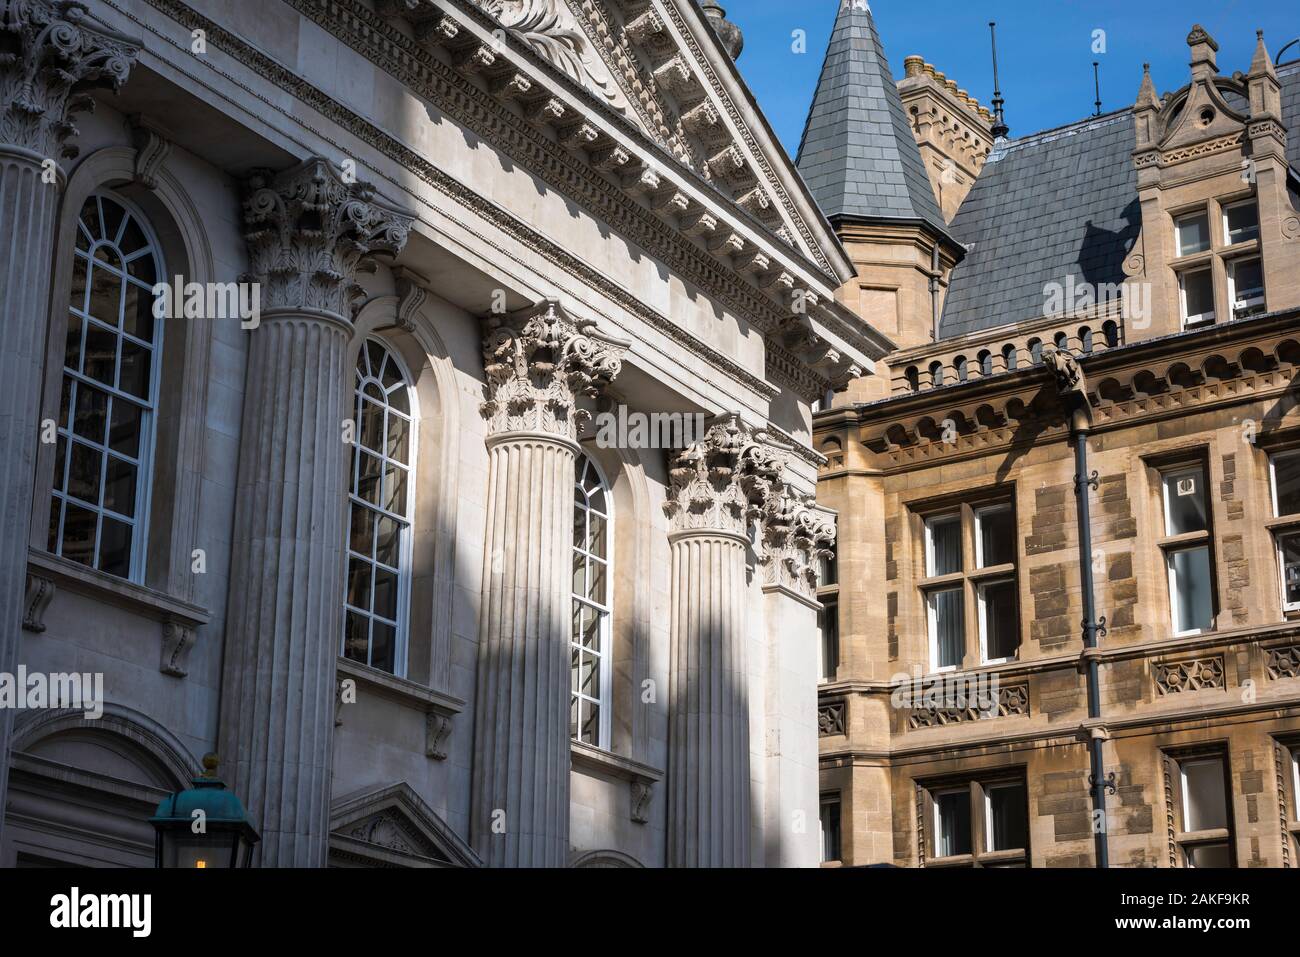 Cambridge University architecture, view of contrasting architectural styles with the Senate House (left) and Gonville and Caius College (right), UK Stock Photo